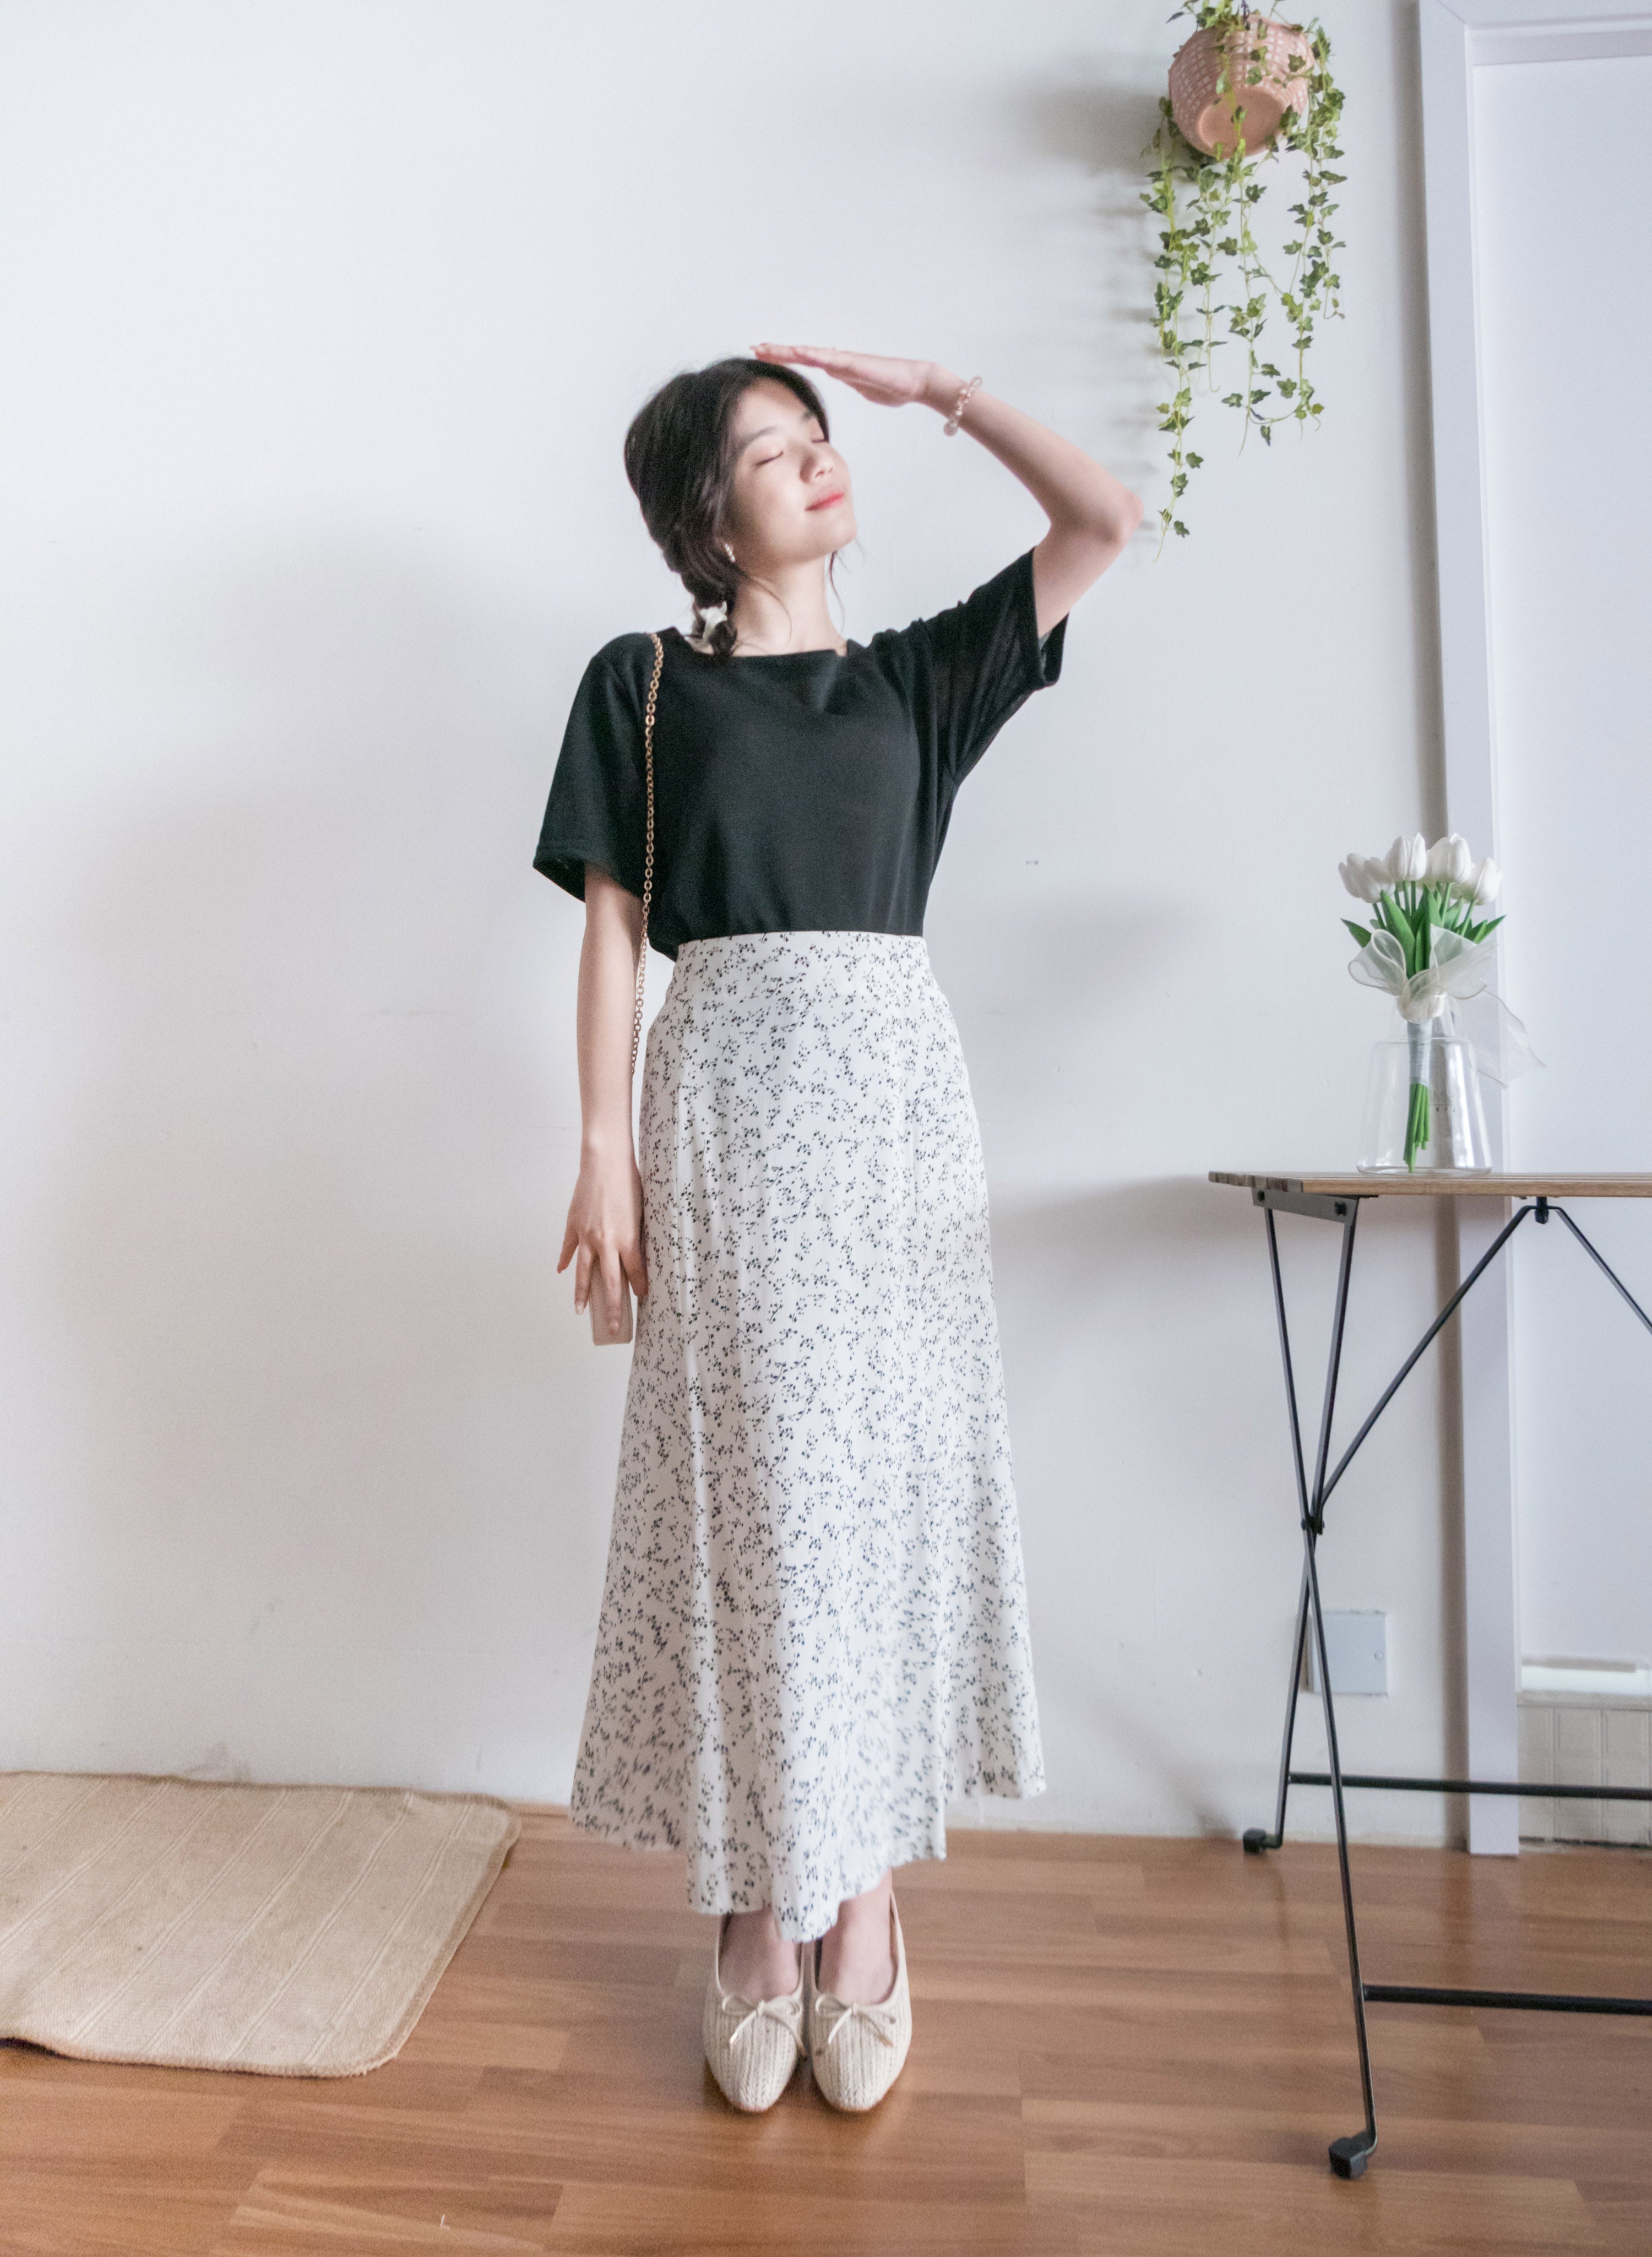 Shadow fishtail 影子印花輕盈日常魚尾裙擺, Skirt/ SK8714 (mint sold out)